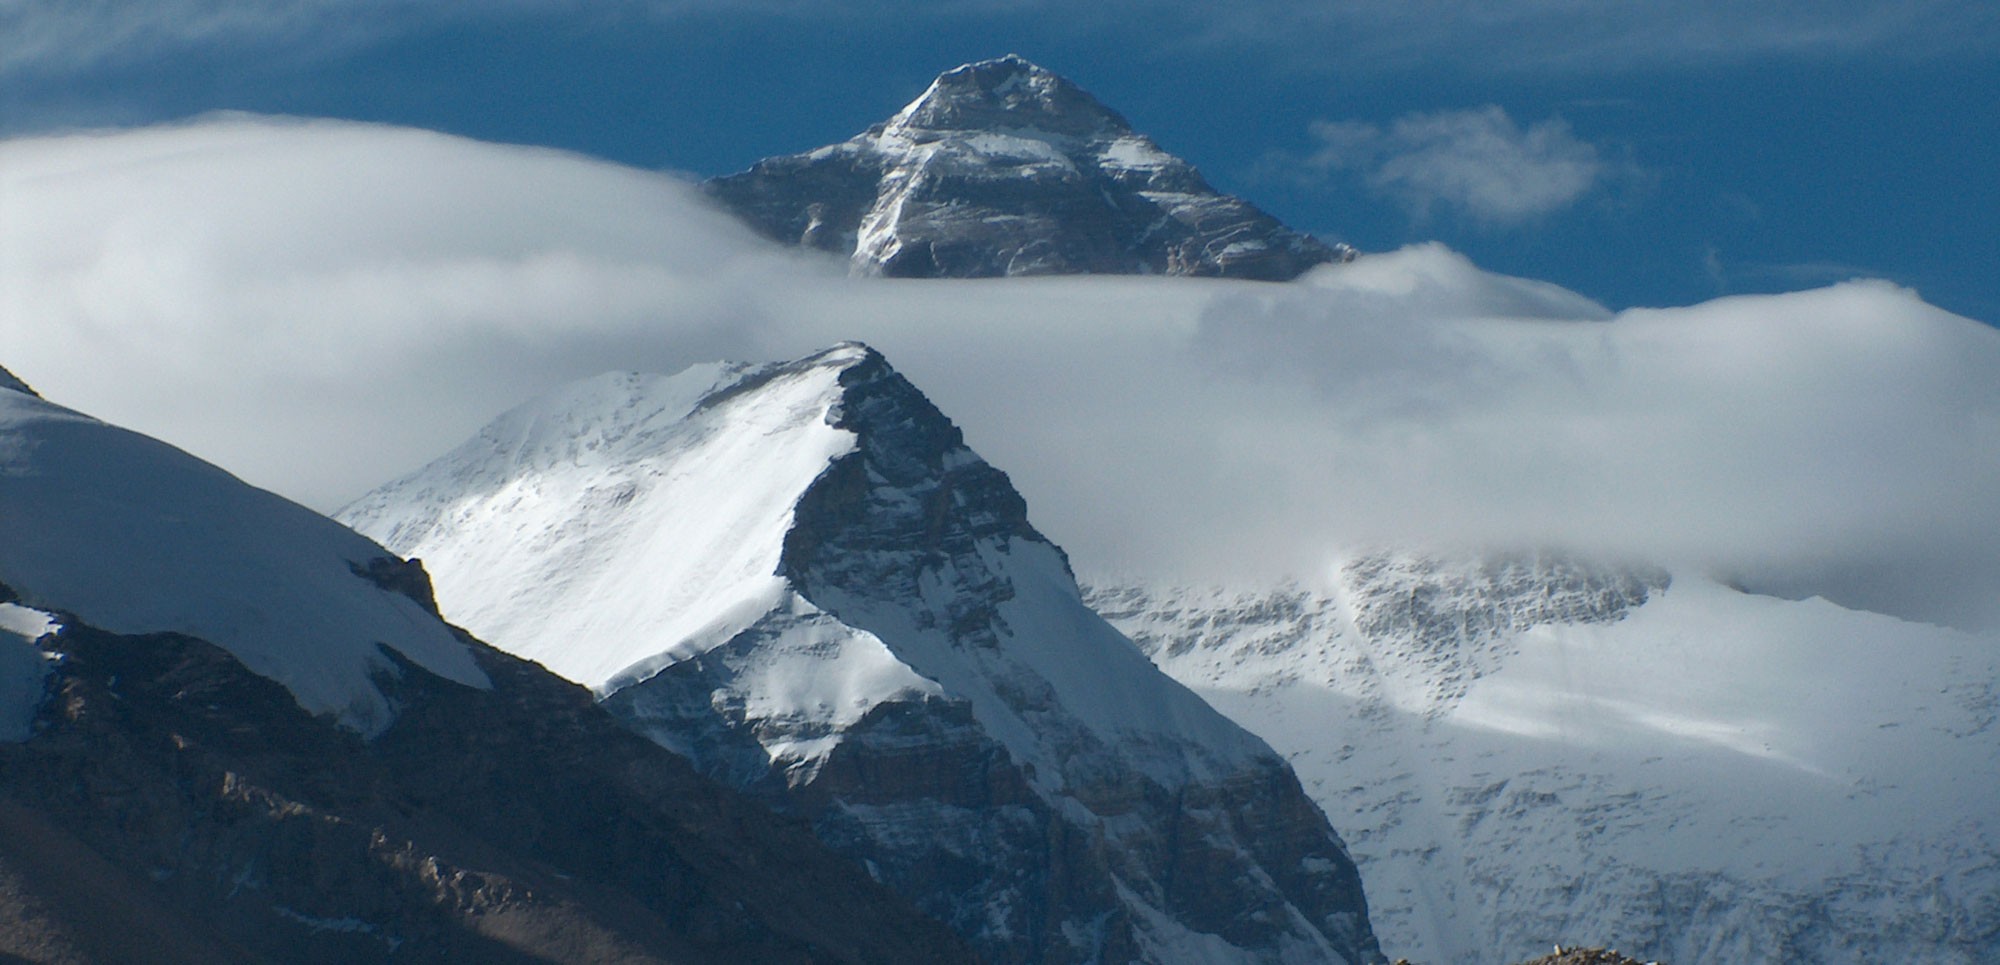 Mount Everest seen on the approach via jeep in Tibet